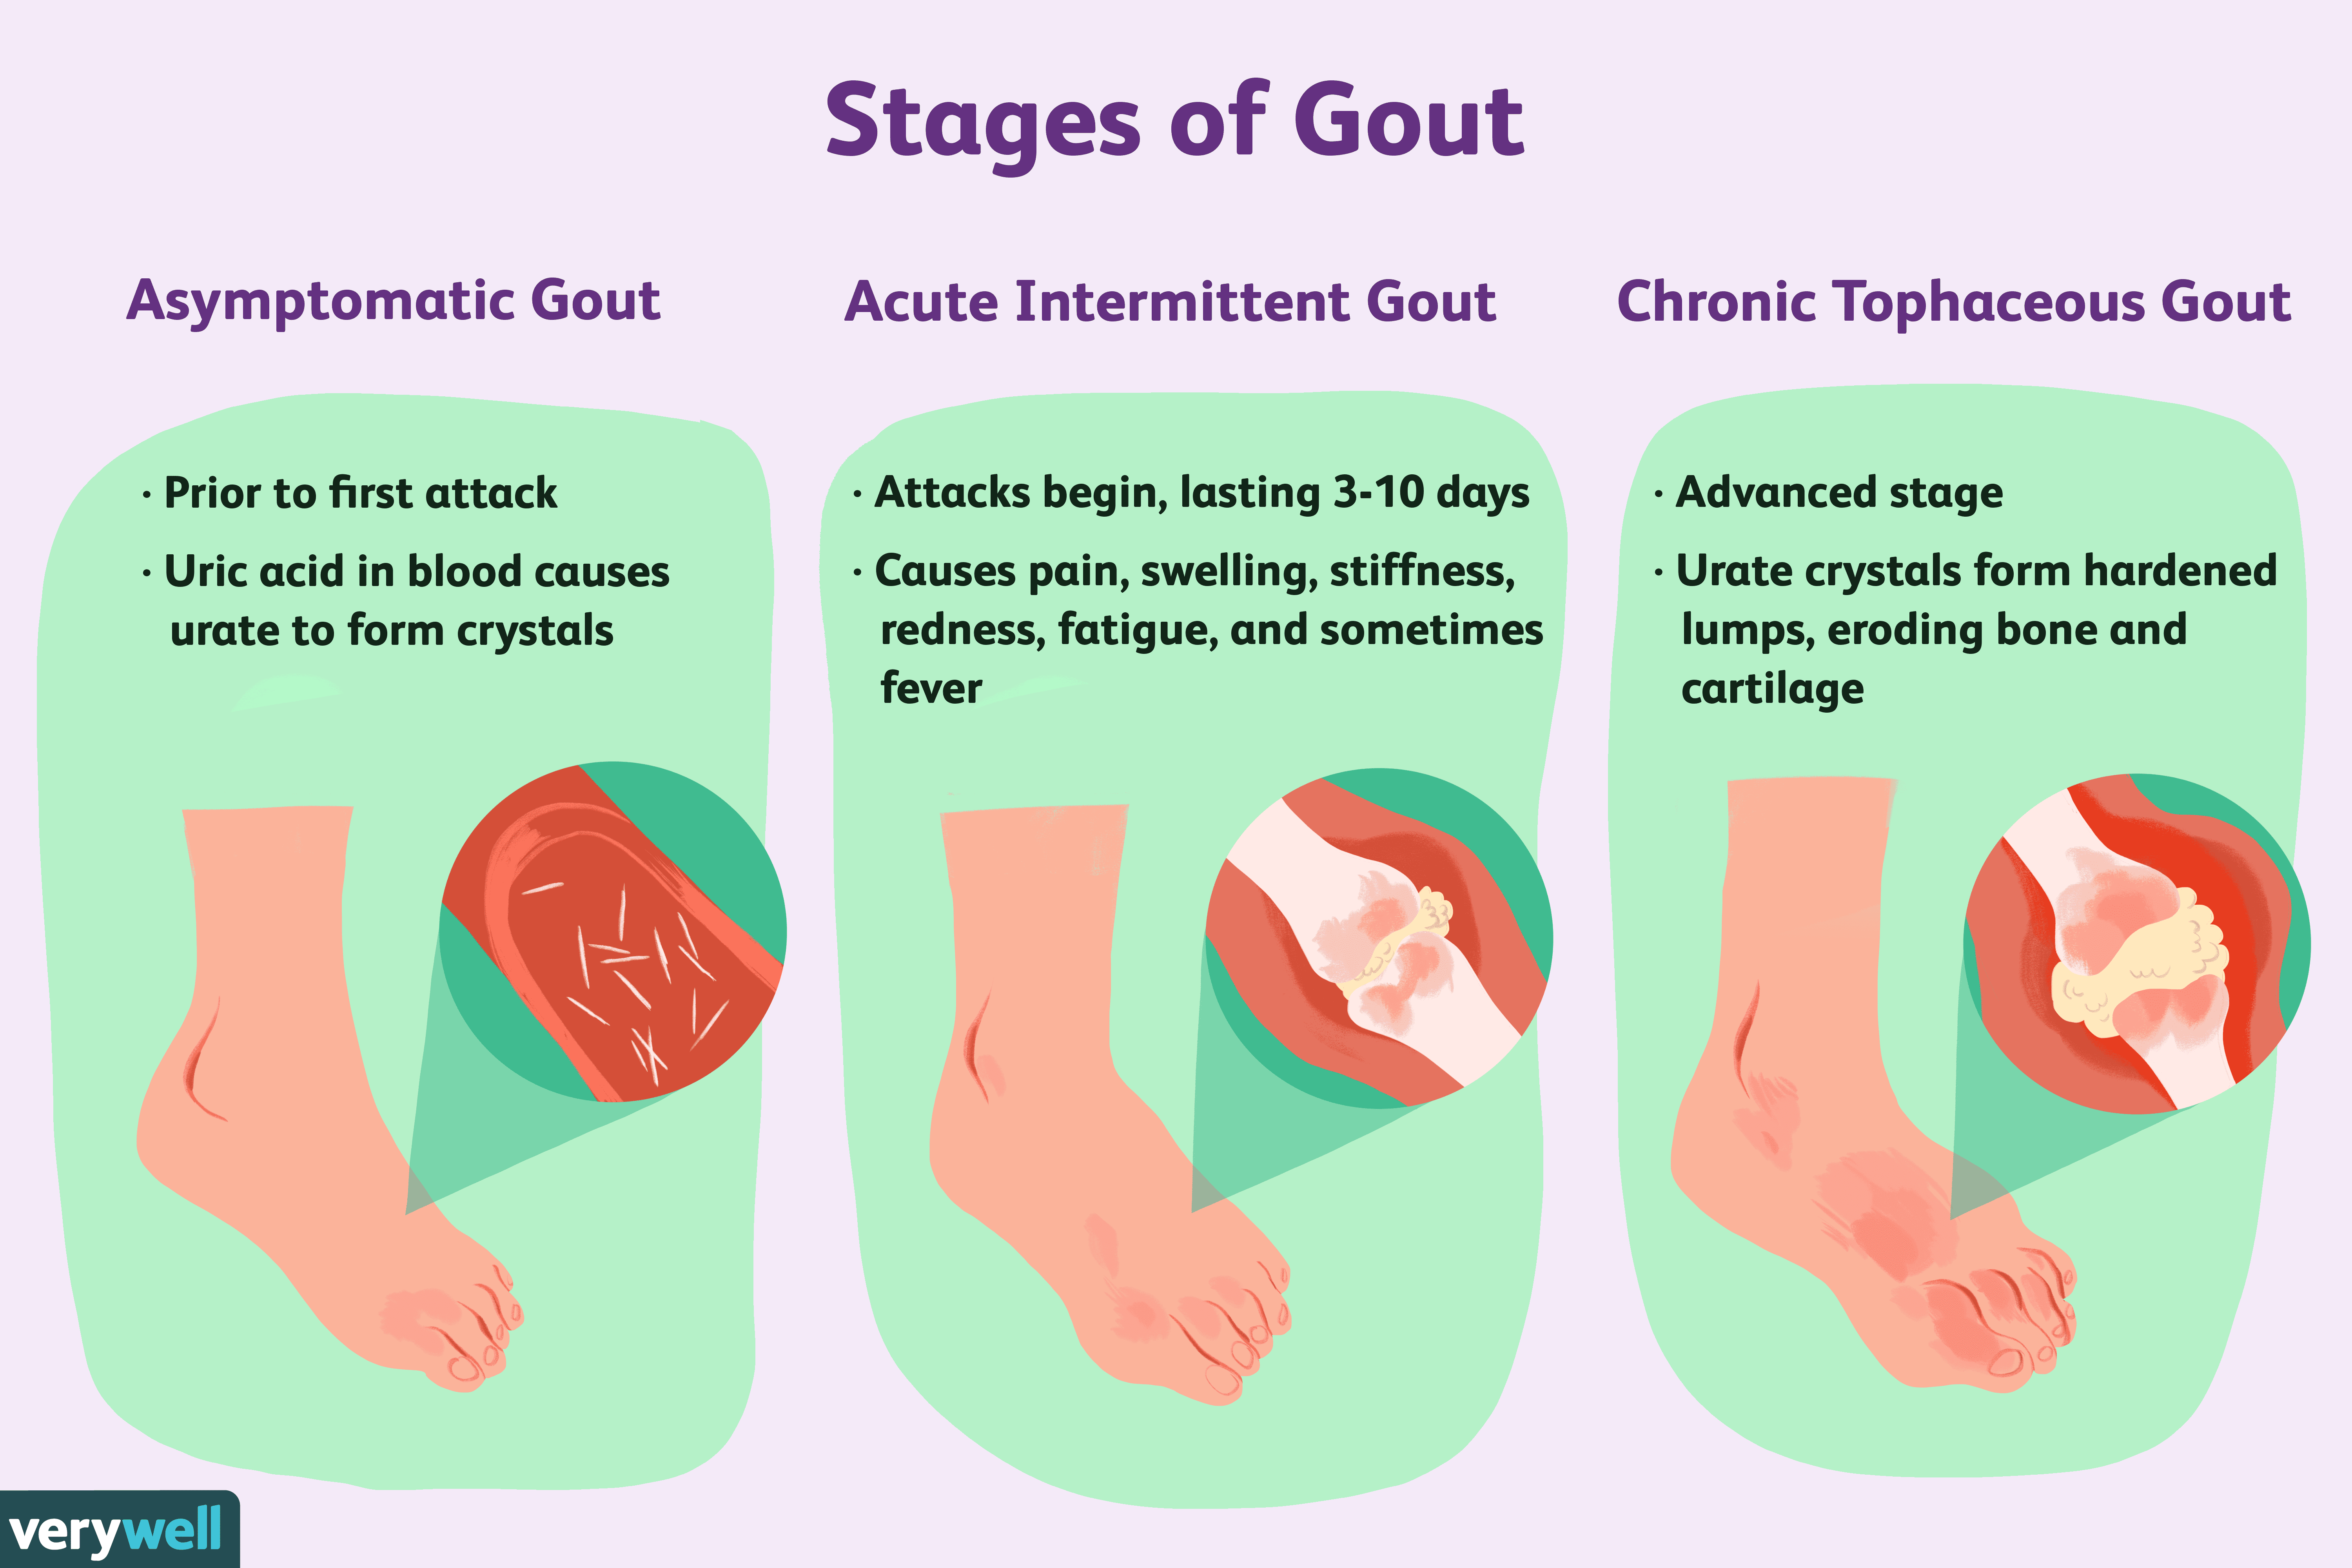 Gout: Symptoms, Pictures, Treatment, and More